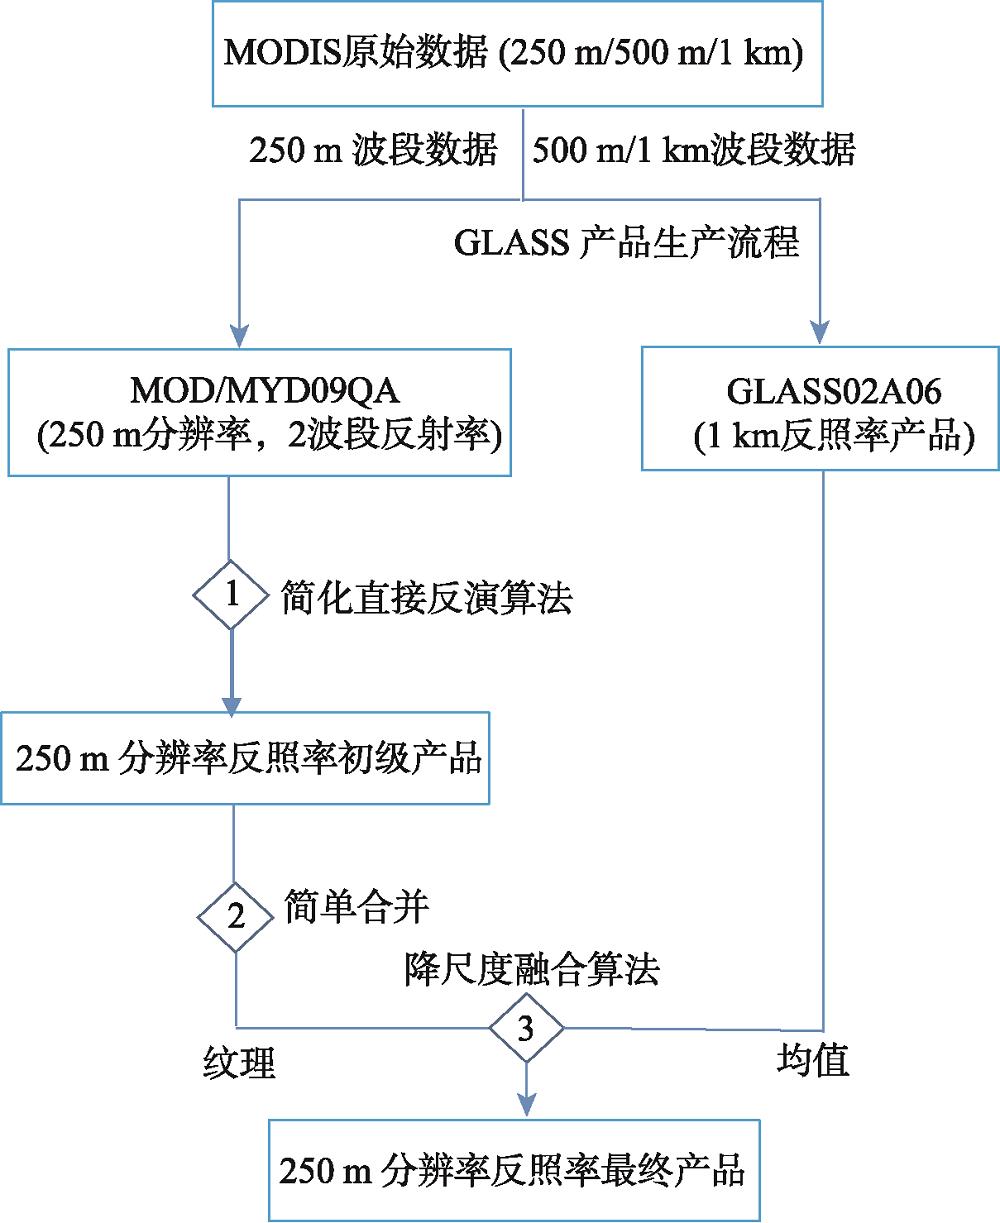 Flowchart for generating the 250 m albedo product